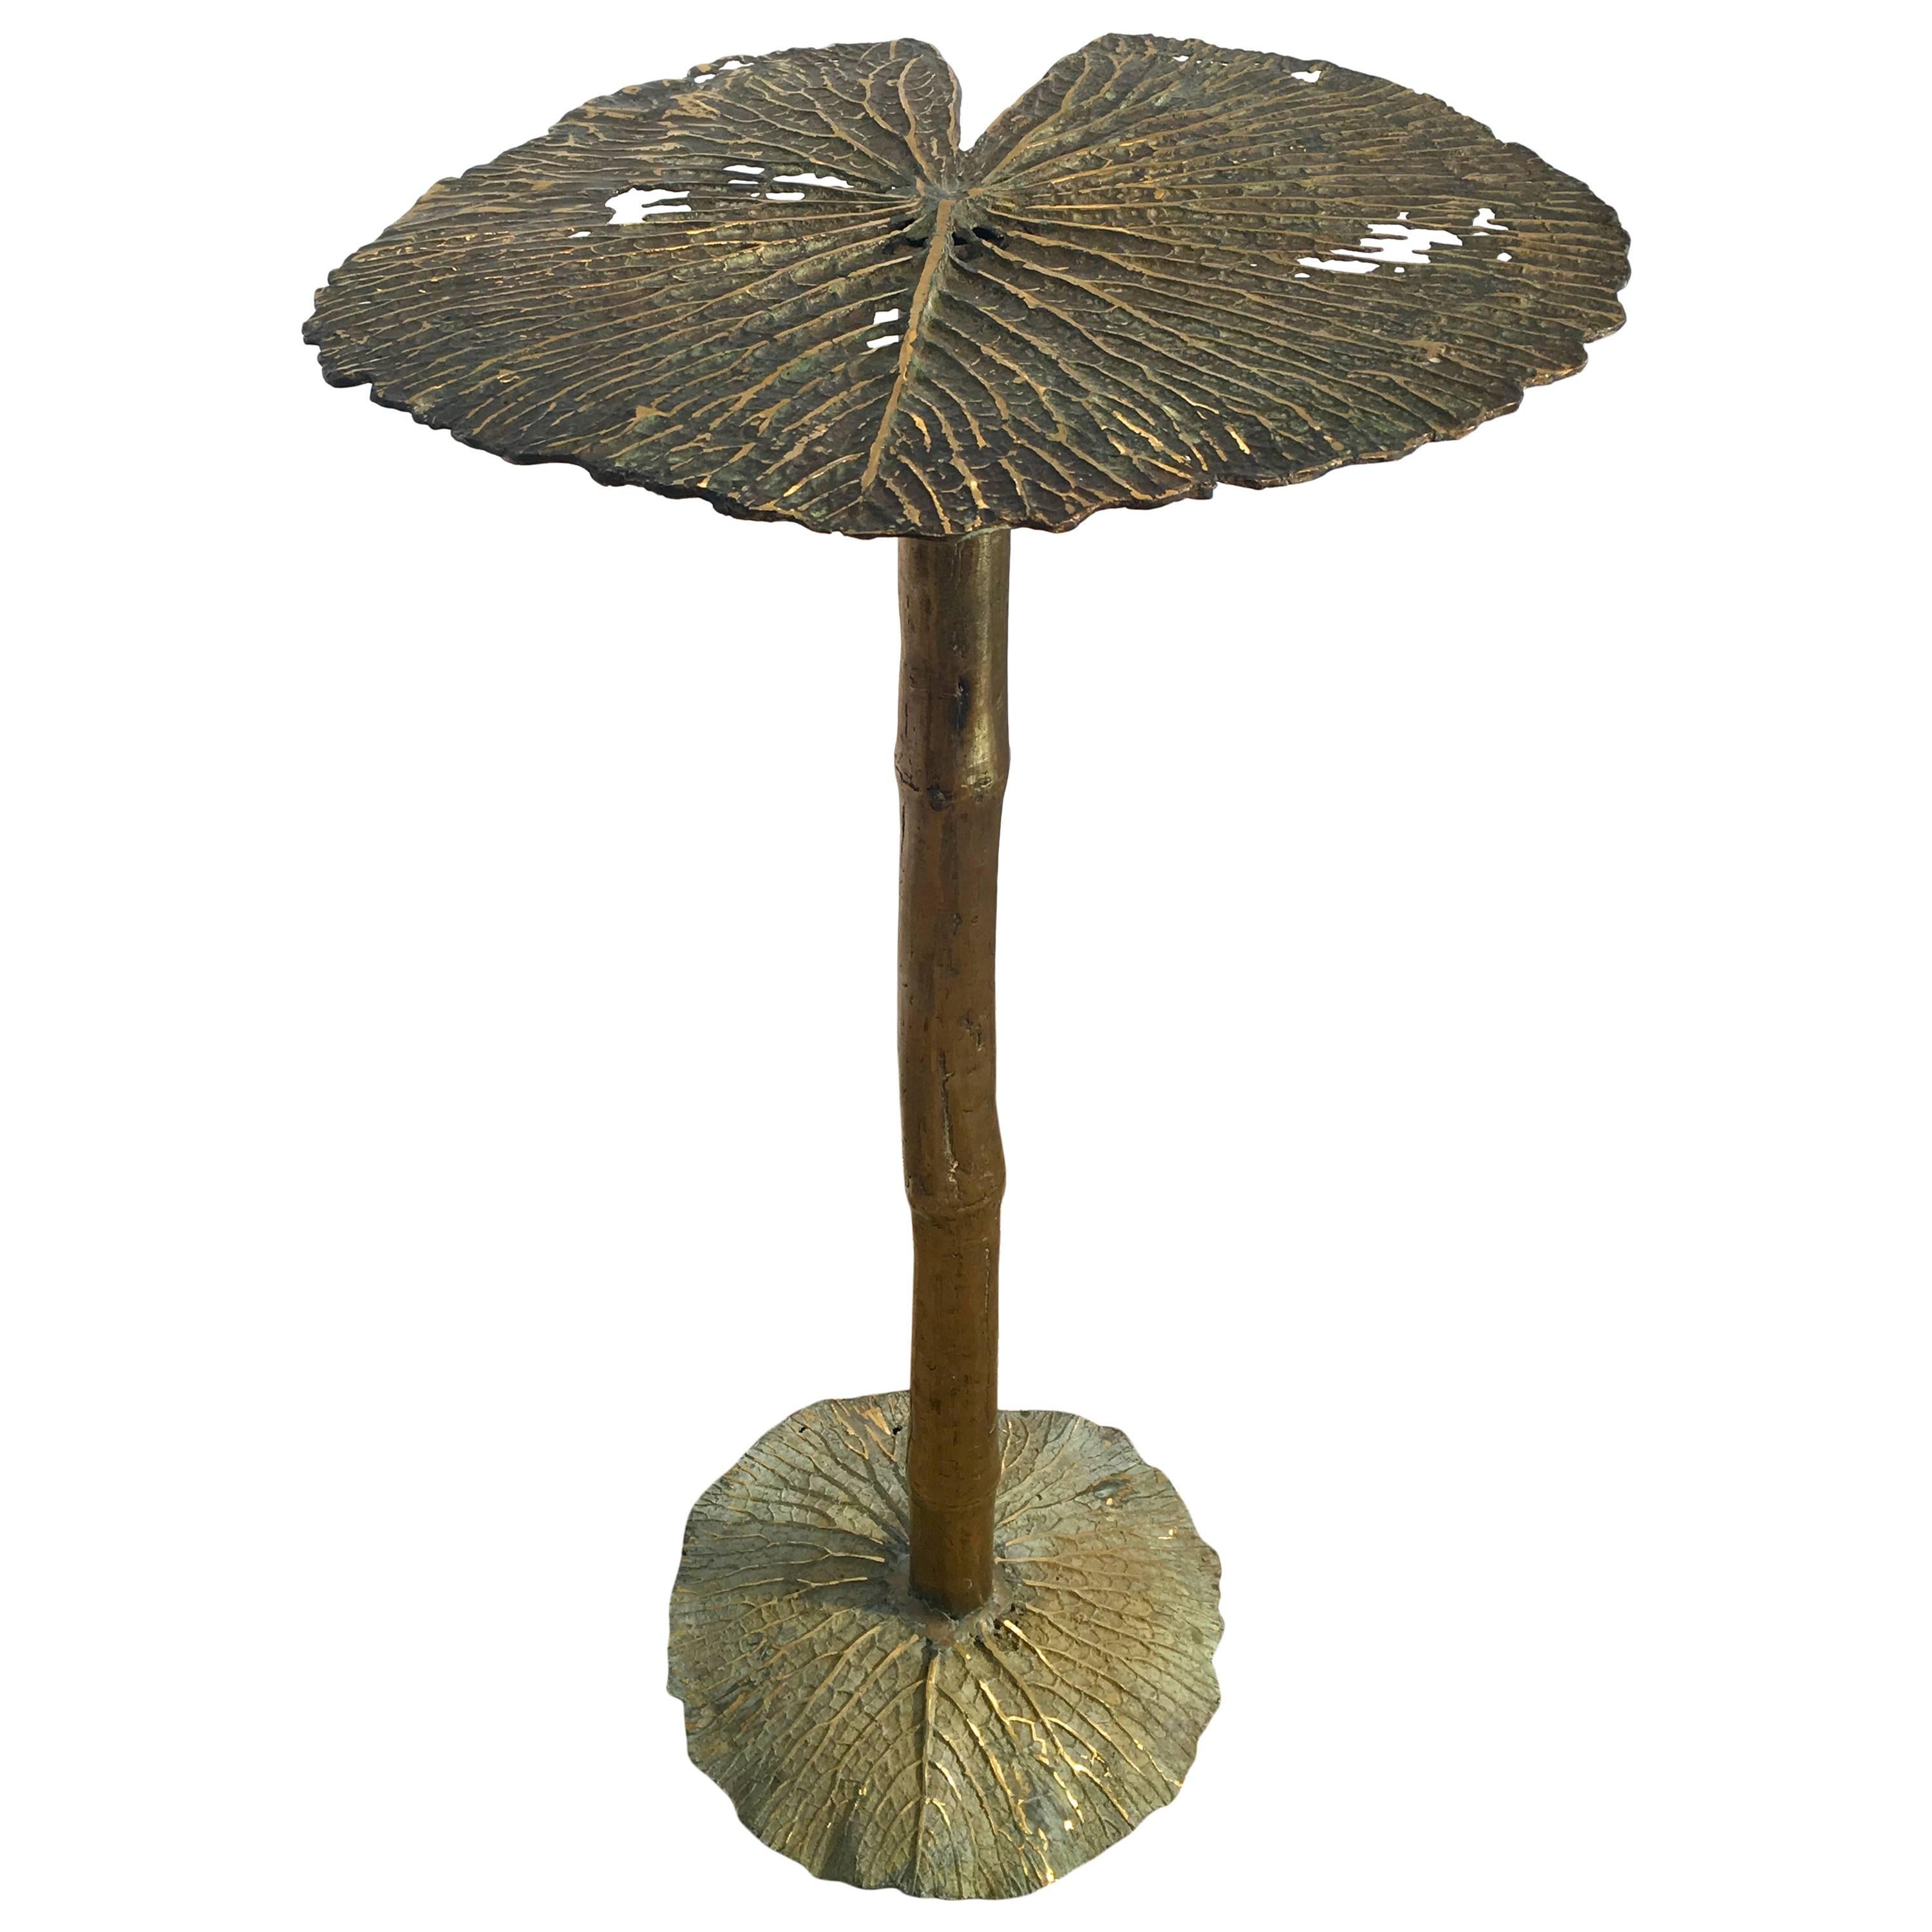 One-of-a-Kind Bronze Lily Pad Table by French Artisan